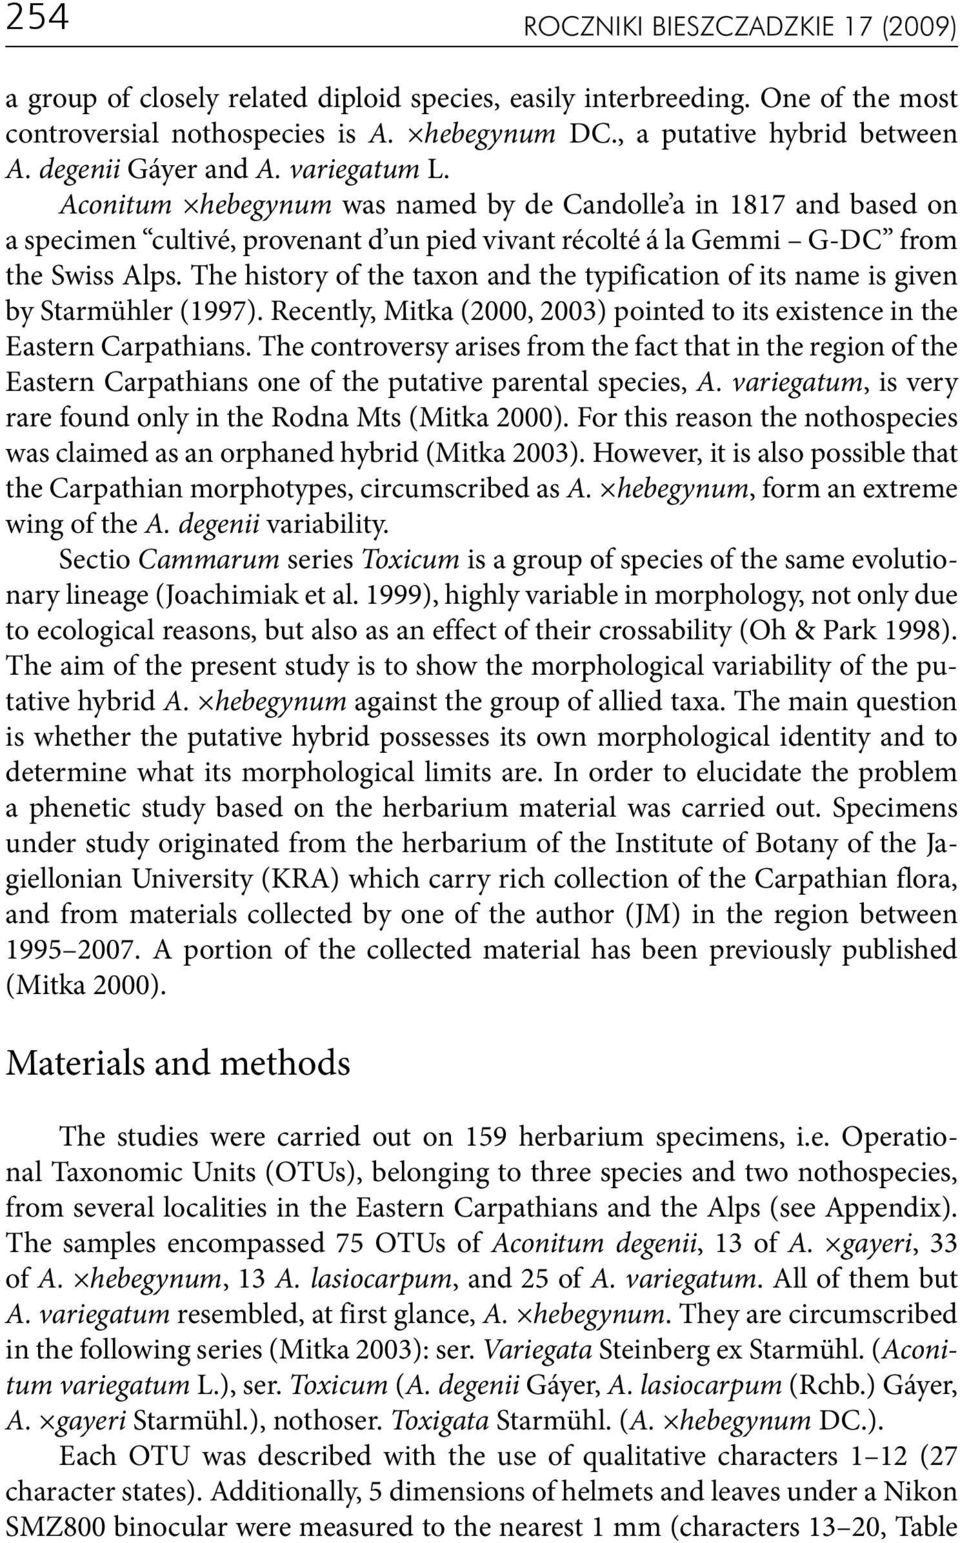 The history of the taxon and the typification of its name is given by Starmühler (1997). Recently, Mitka (2000, 2003) pointed to its existence in the Eastern Carpathians.